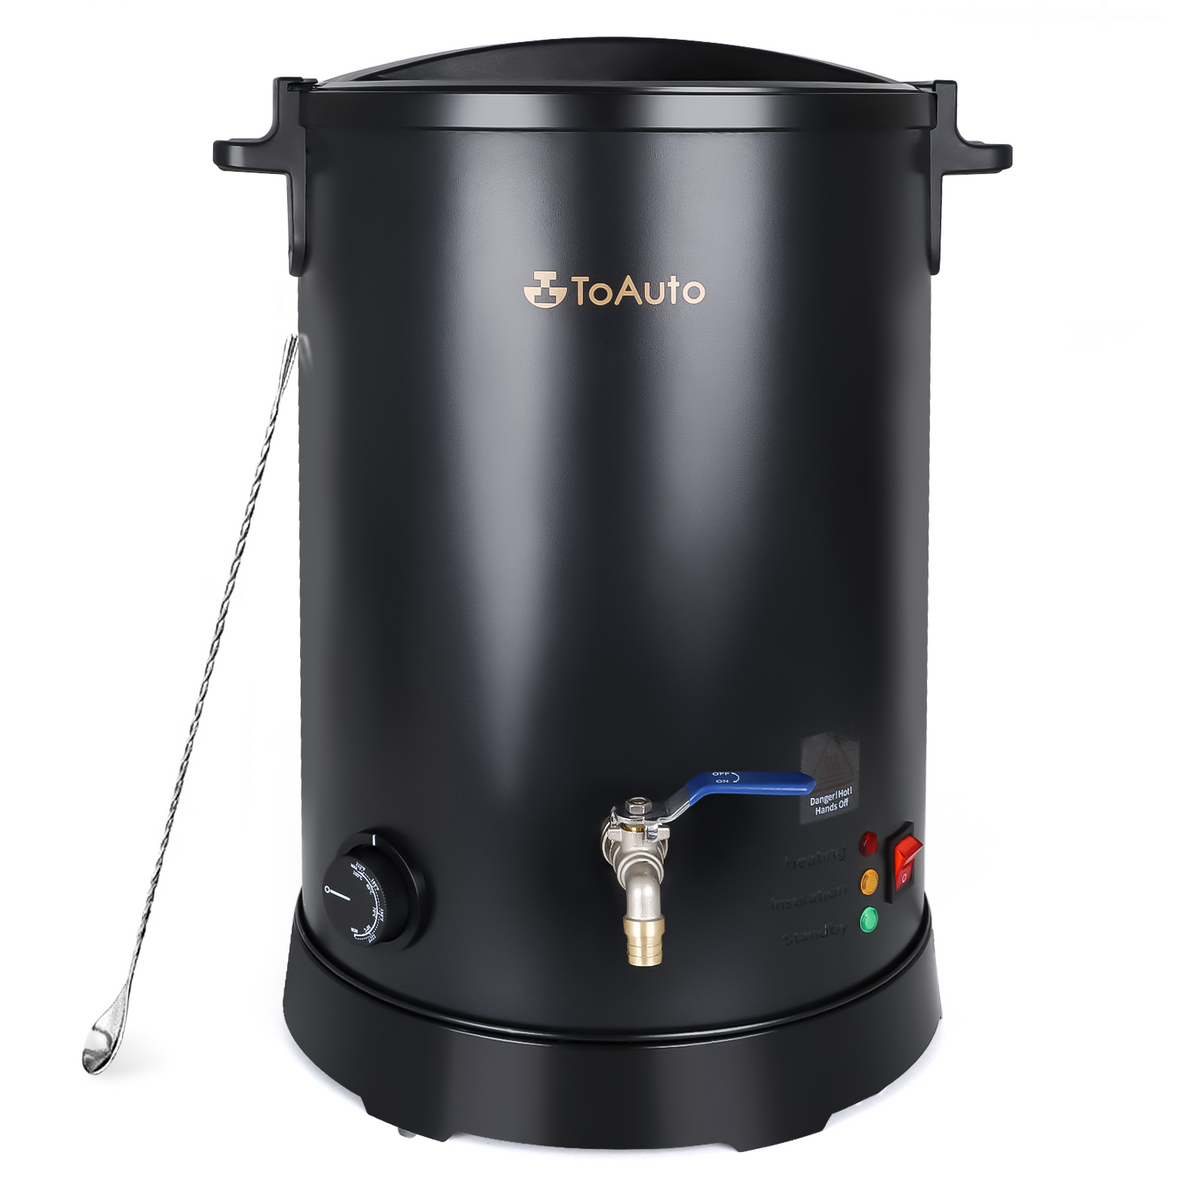 TOAUTO Wmf-5l Wax Melter for Candle Making - Candle Wax Melting Pot with Faster Pour Spout and Temperature Controller, No Cloggy and Easy Clean Up